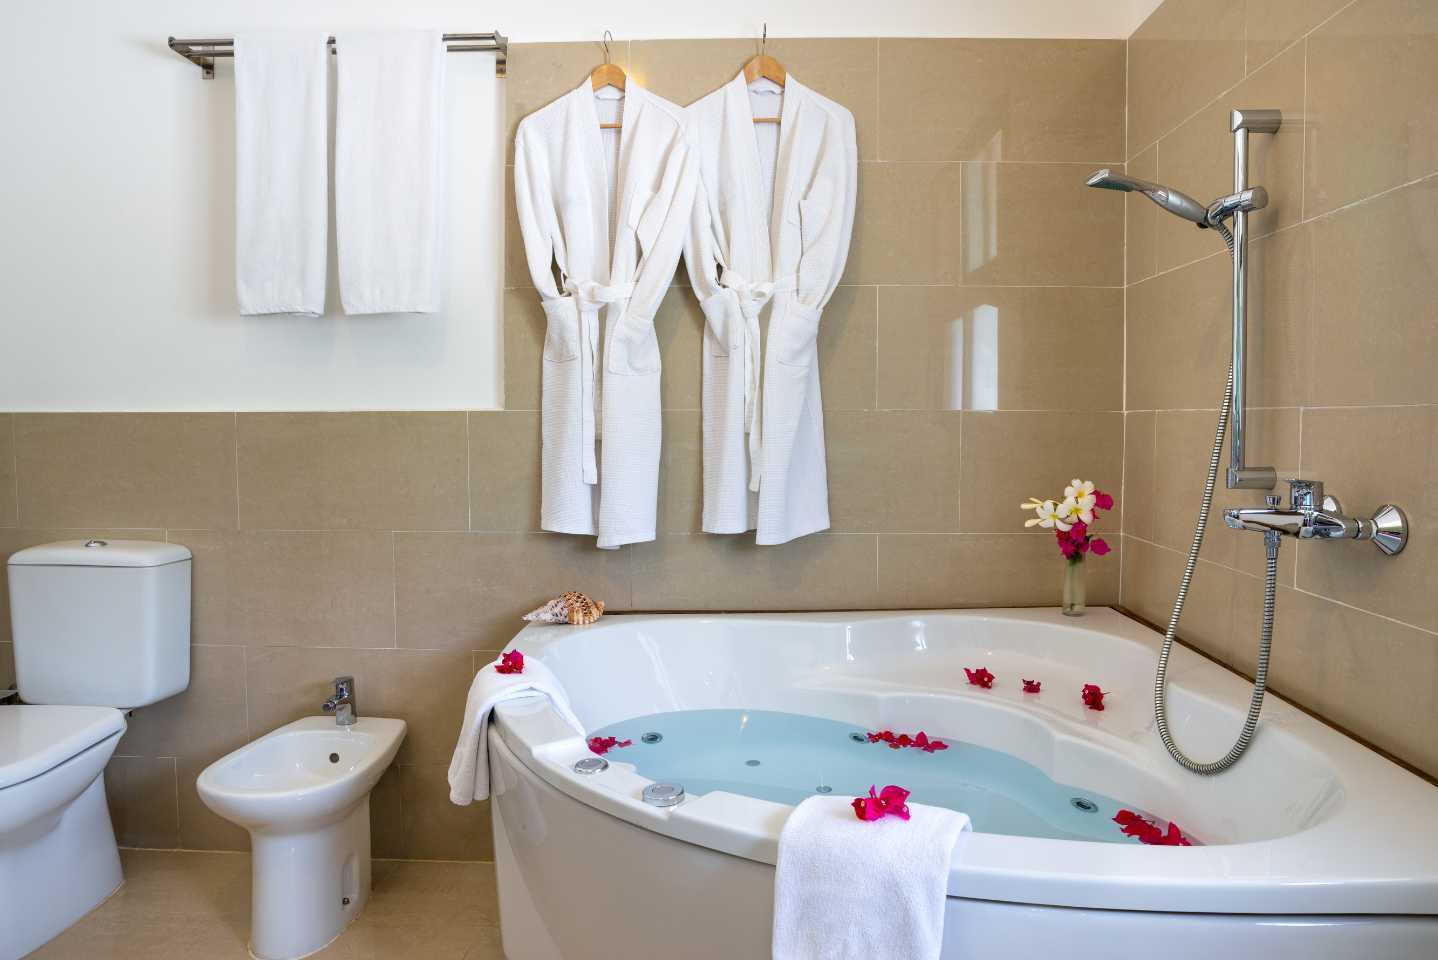 Corner bath with flowers in it, bathrobes on the wall, towels hung-up. A shower for the bath, bidet and toilet are also in the photograph.